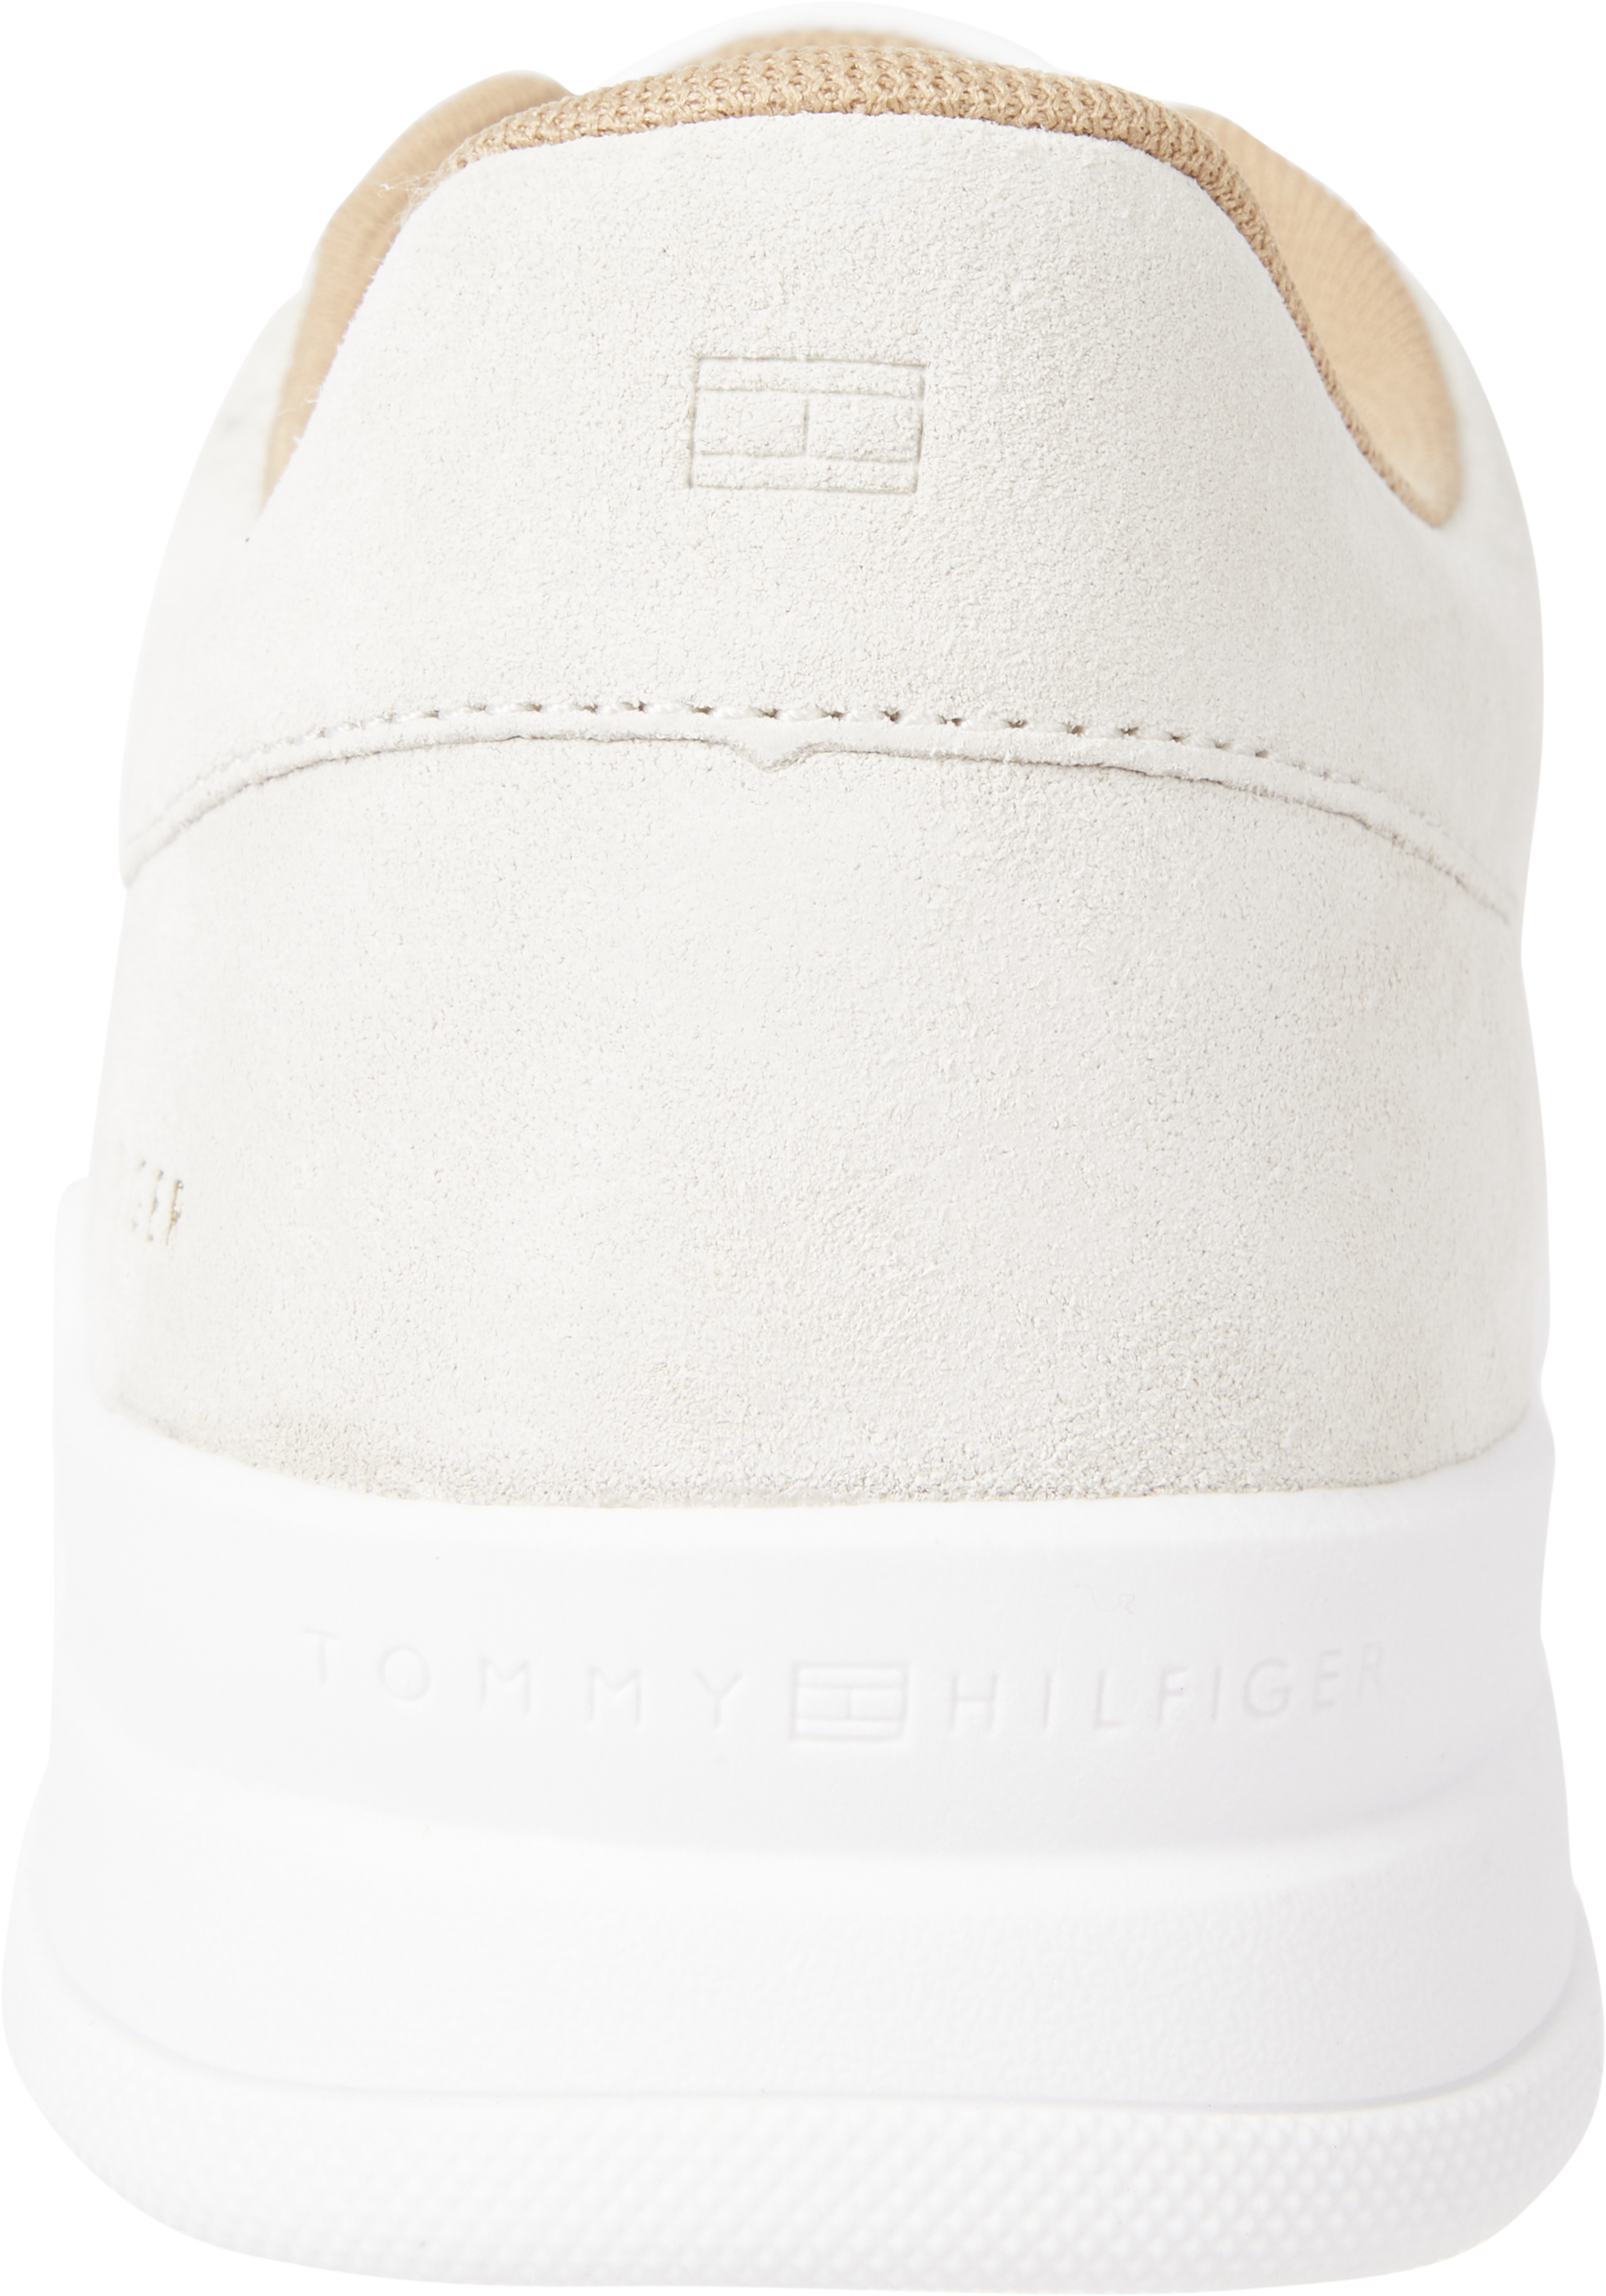 Elevated Suede Sneakers, Classic Beige, 45